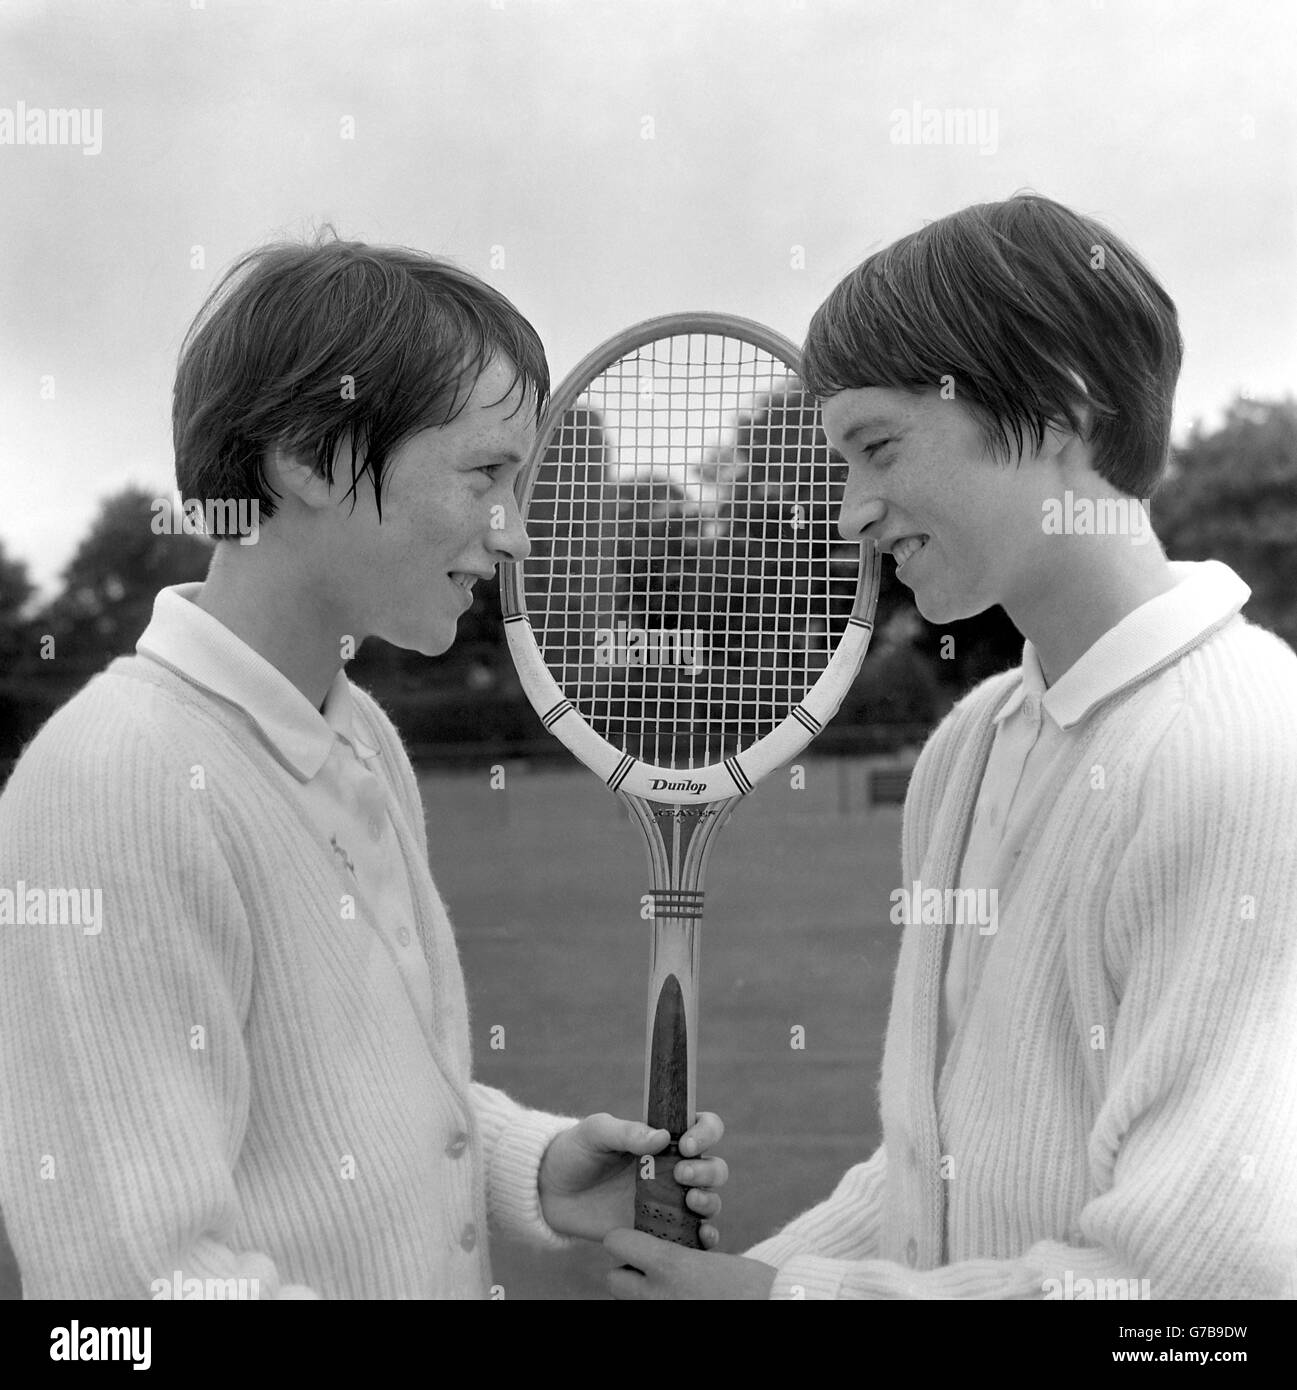 Identical twins taking part in the championship are Gwen (left) and Evelyn Armstrong, aged 16, from Kilmacolm near Glasgow. Gwen won her match against Miss H. Retter and Evelyn lost to Miss D. Oakley. Stock Photo